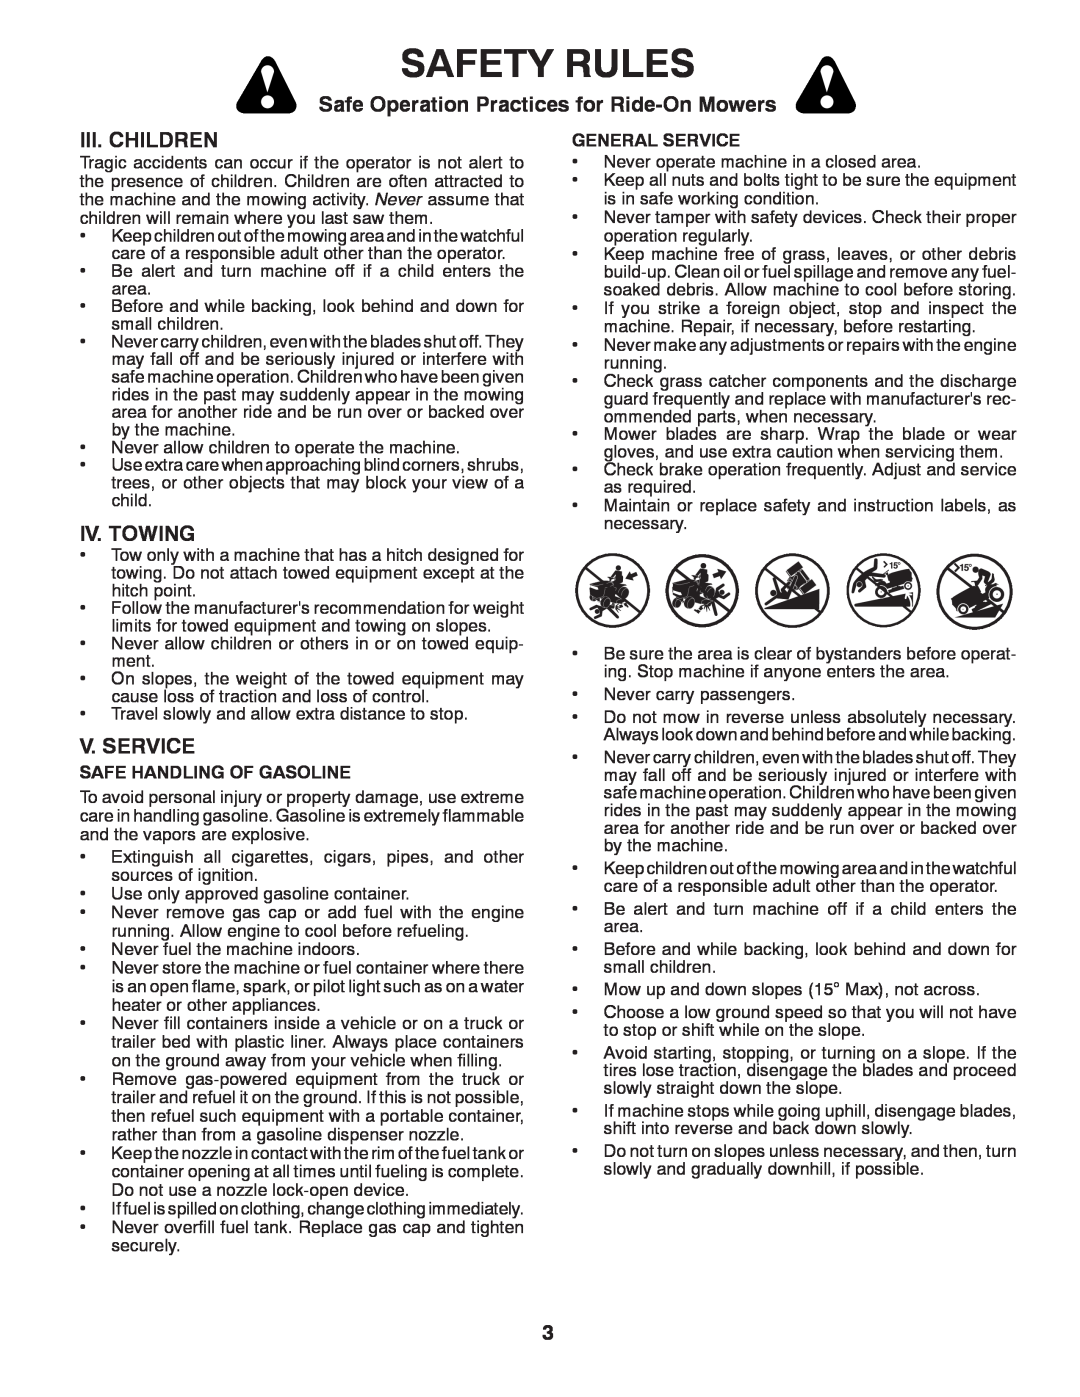 Husqvarna 532 42 20-50_R1 Iii. Children, Iv. Towing, V. Service, Safety Rules, Safe Operation Practices for Ride-On Mowers 